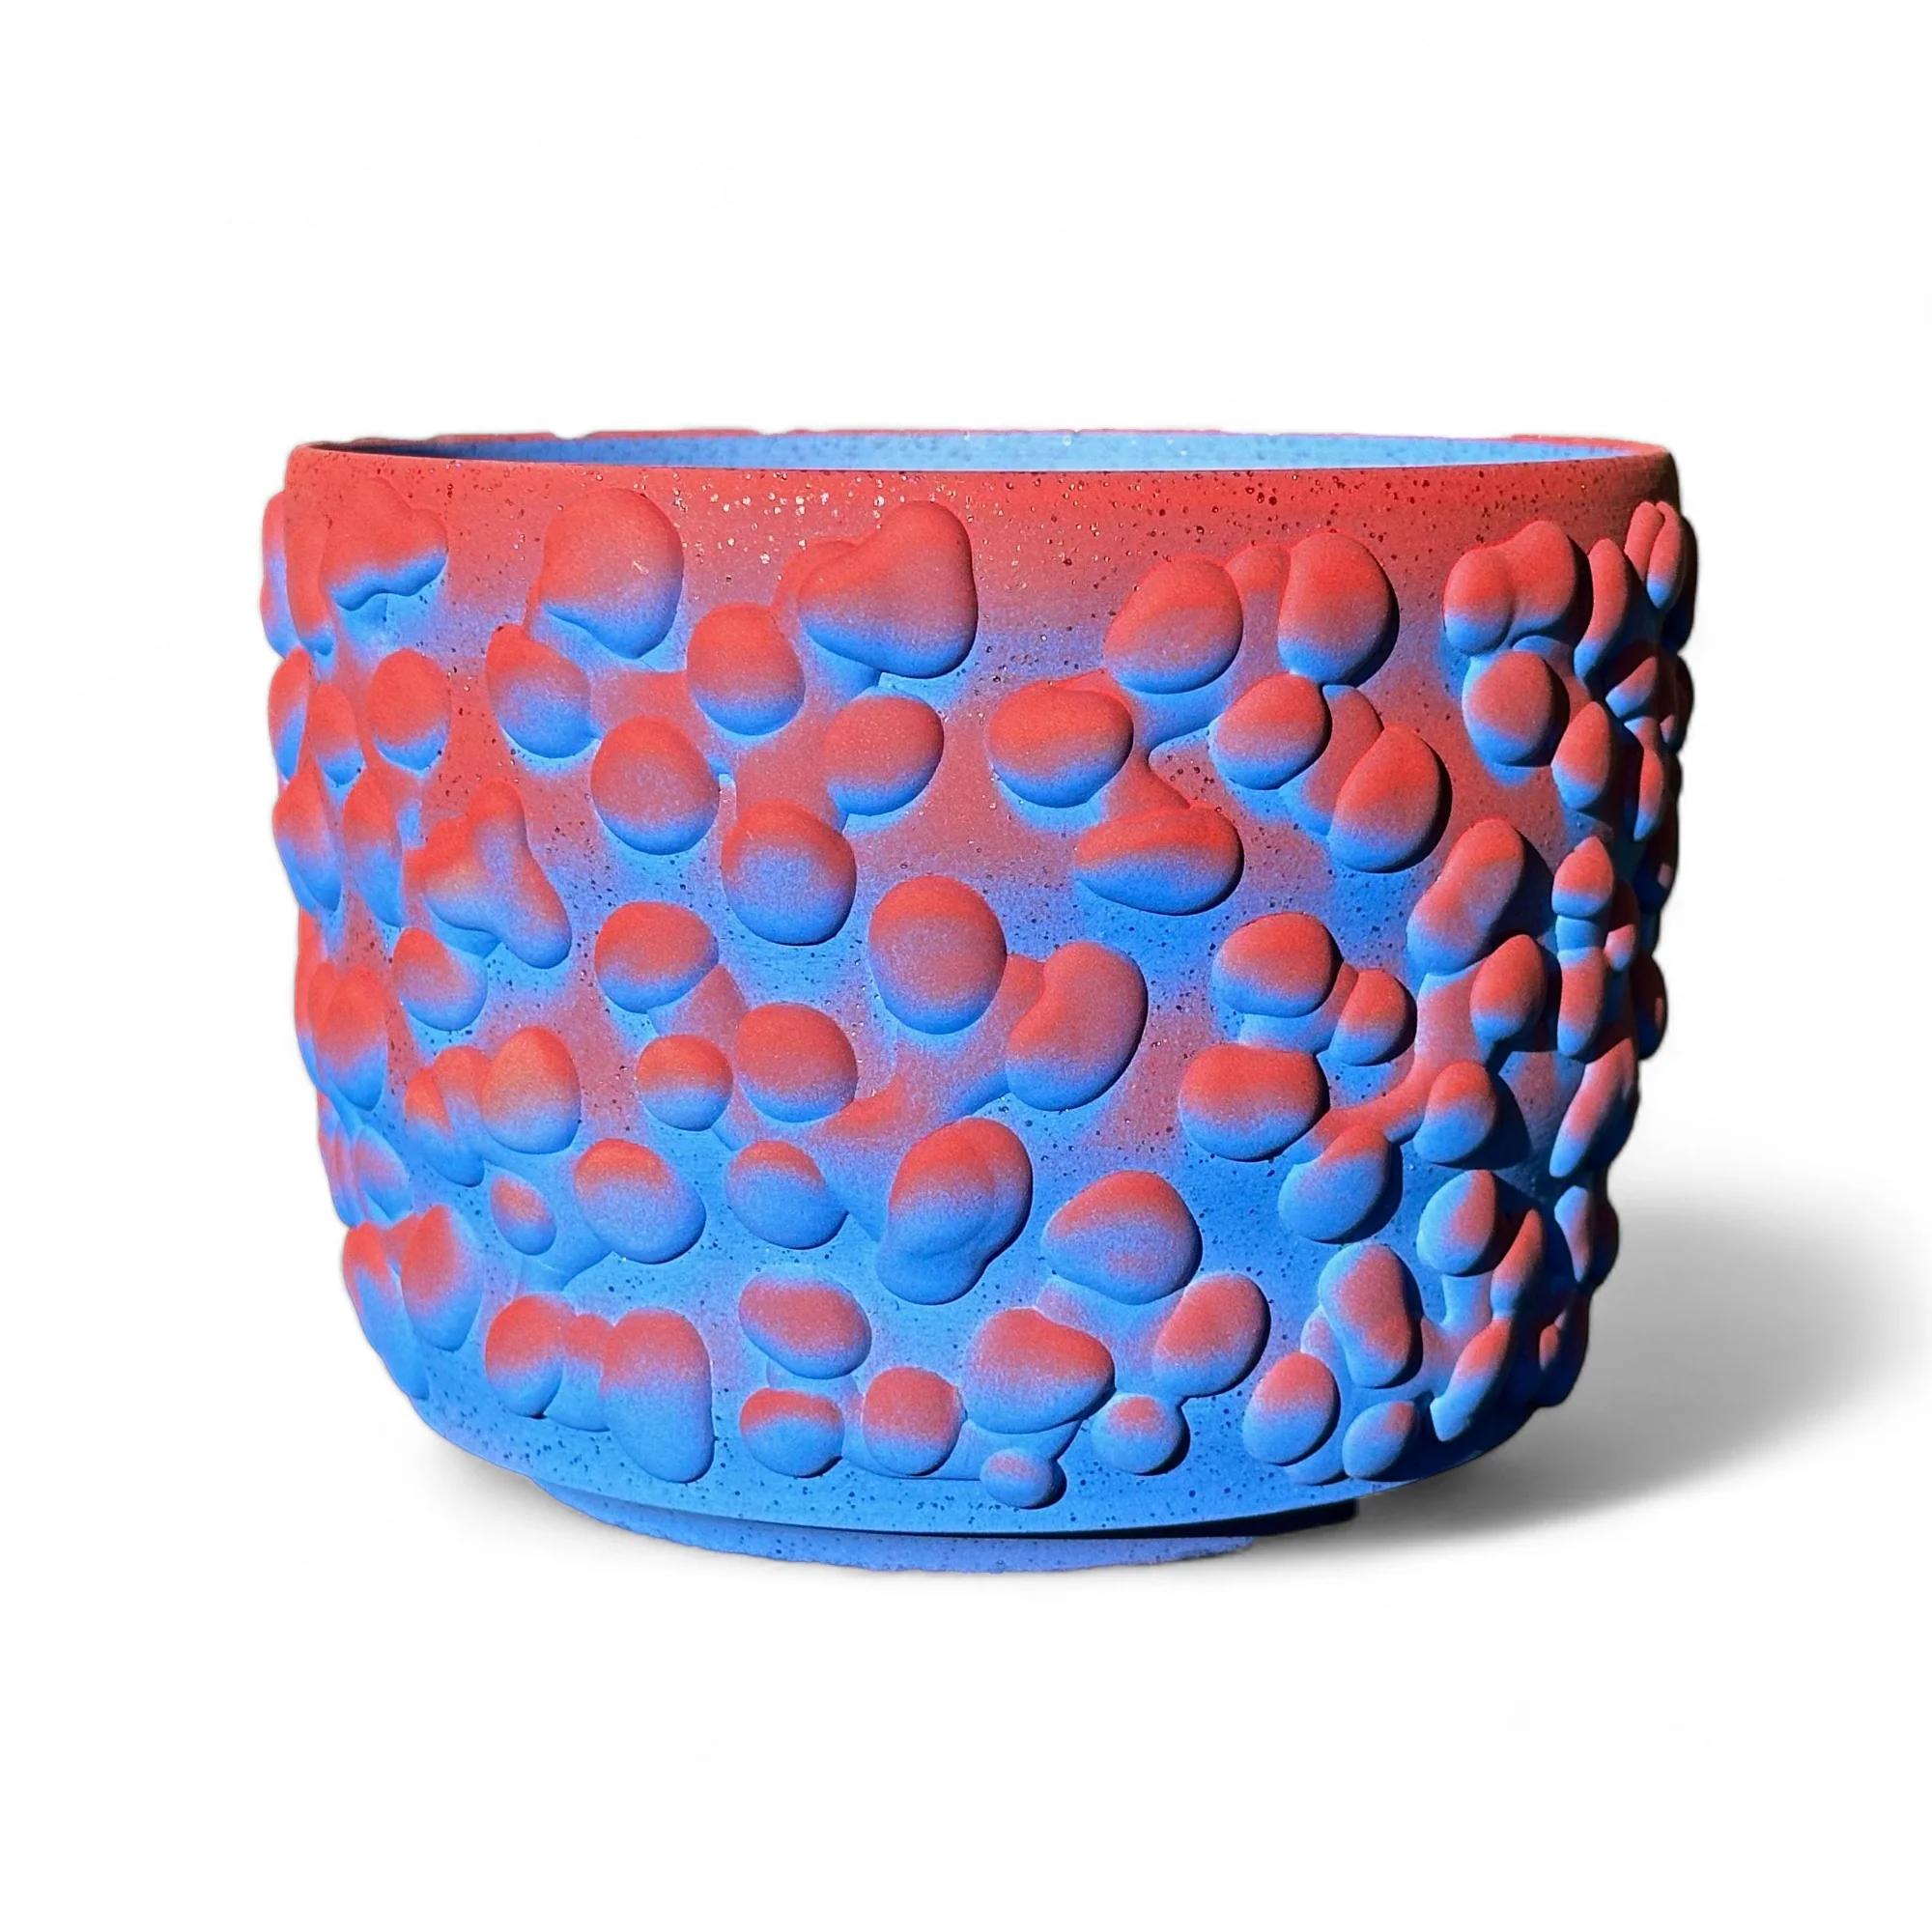 American Cobalt And Cinnabar Organic Ombre Planter For Sale